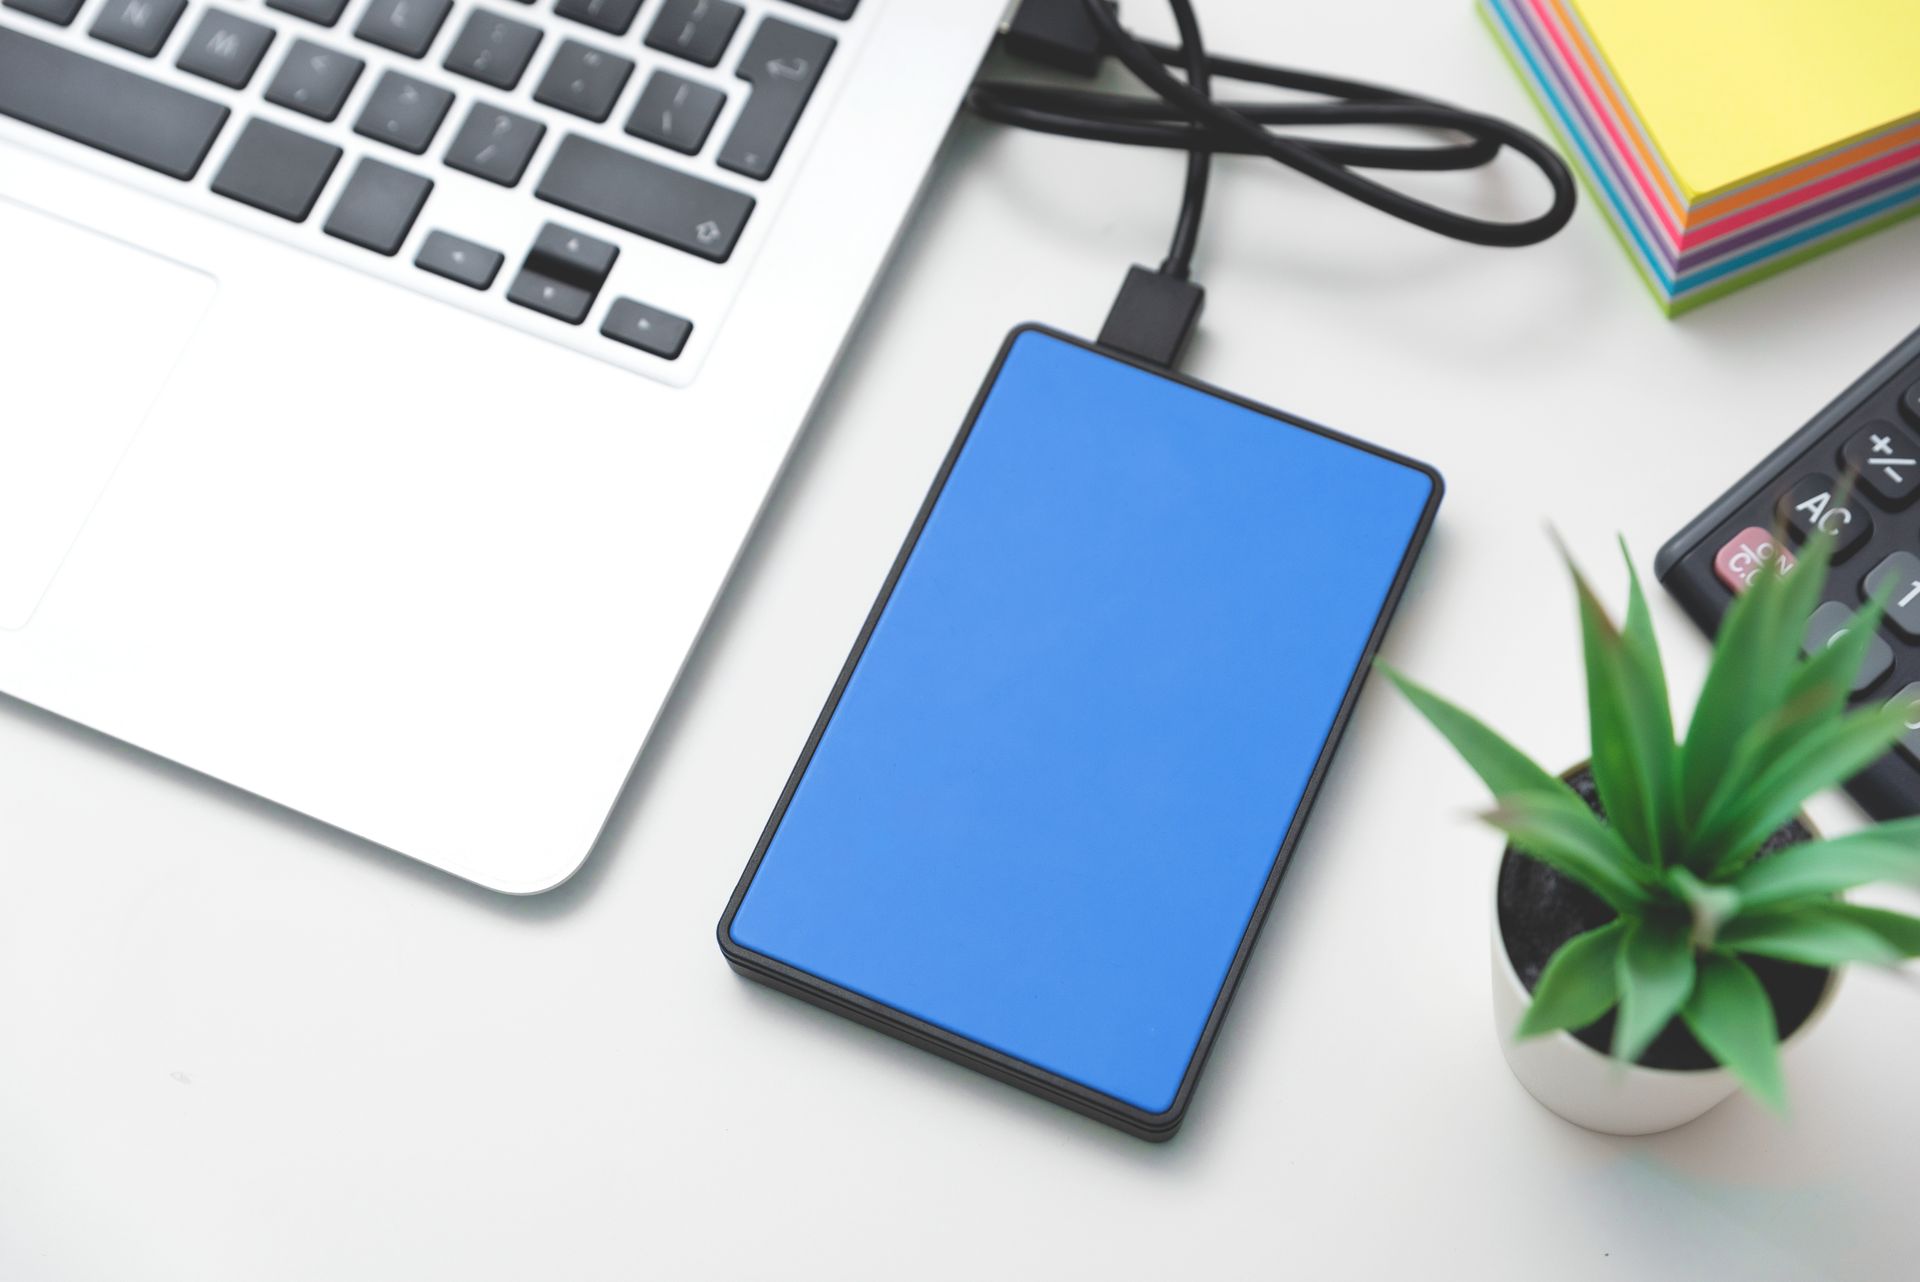 A blue external hard drive is plugged into a laptop.